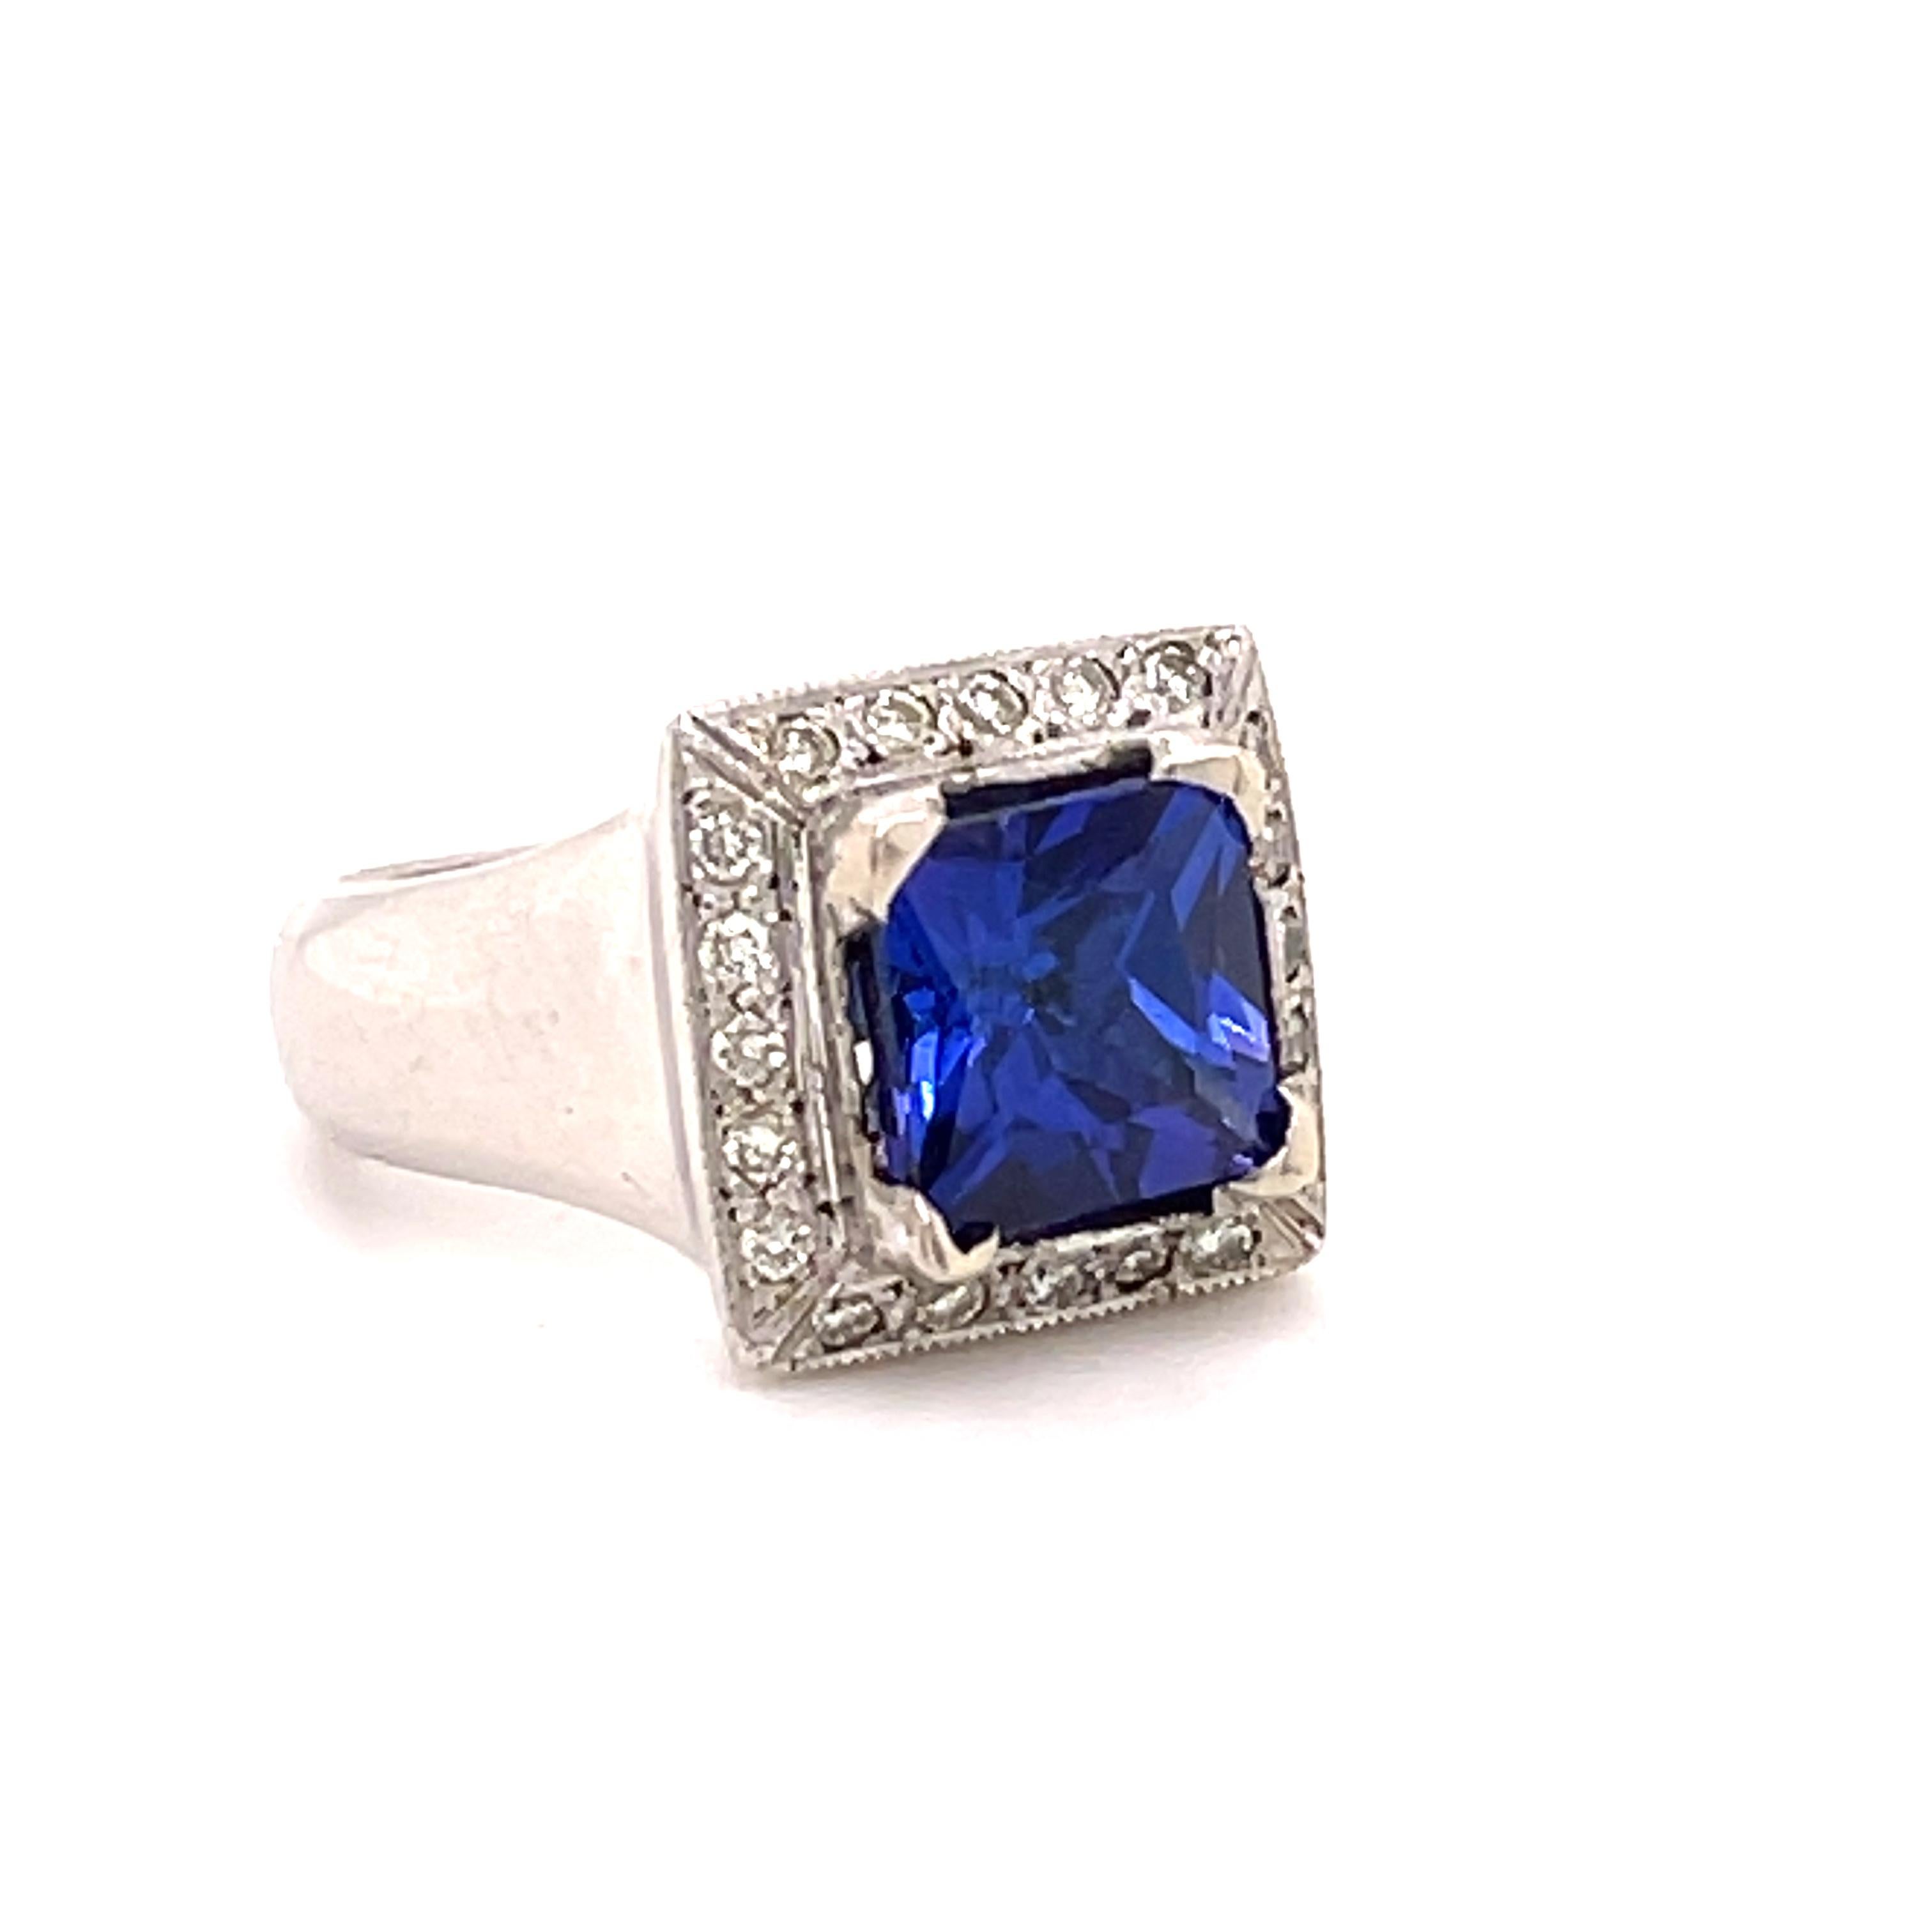 3.93 Carat Tanzanite and Diamond Gold Ring In New Condition For Sale In Tucson, AZ